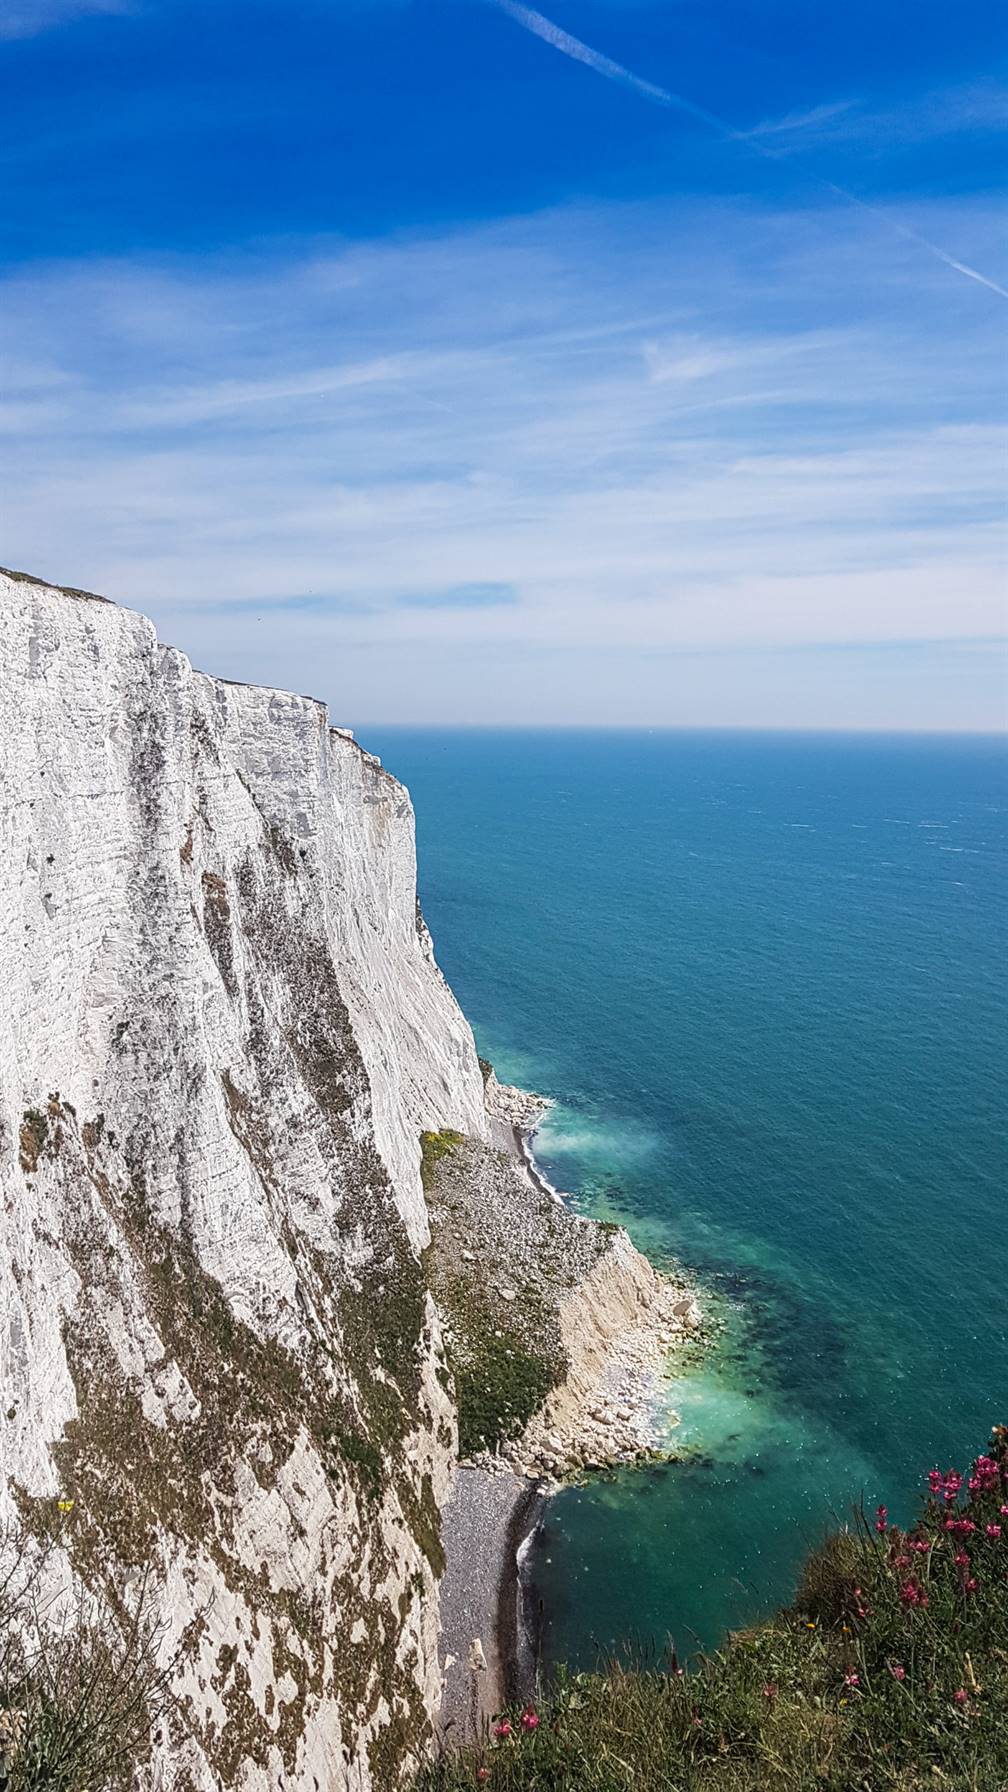 The White Cliff, Angleterre